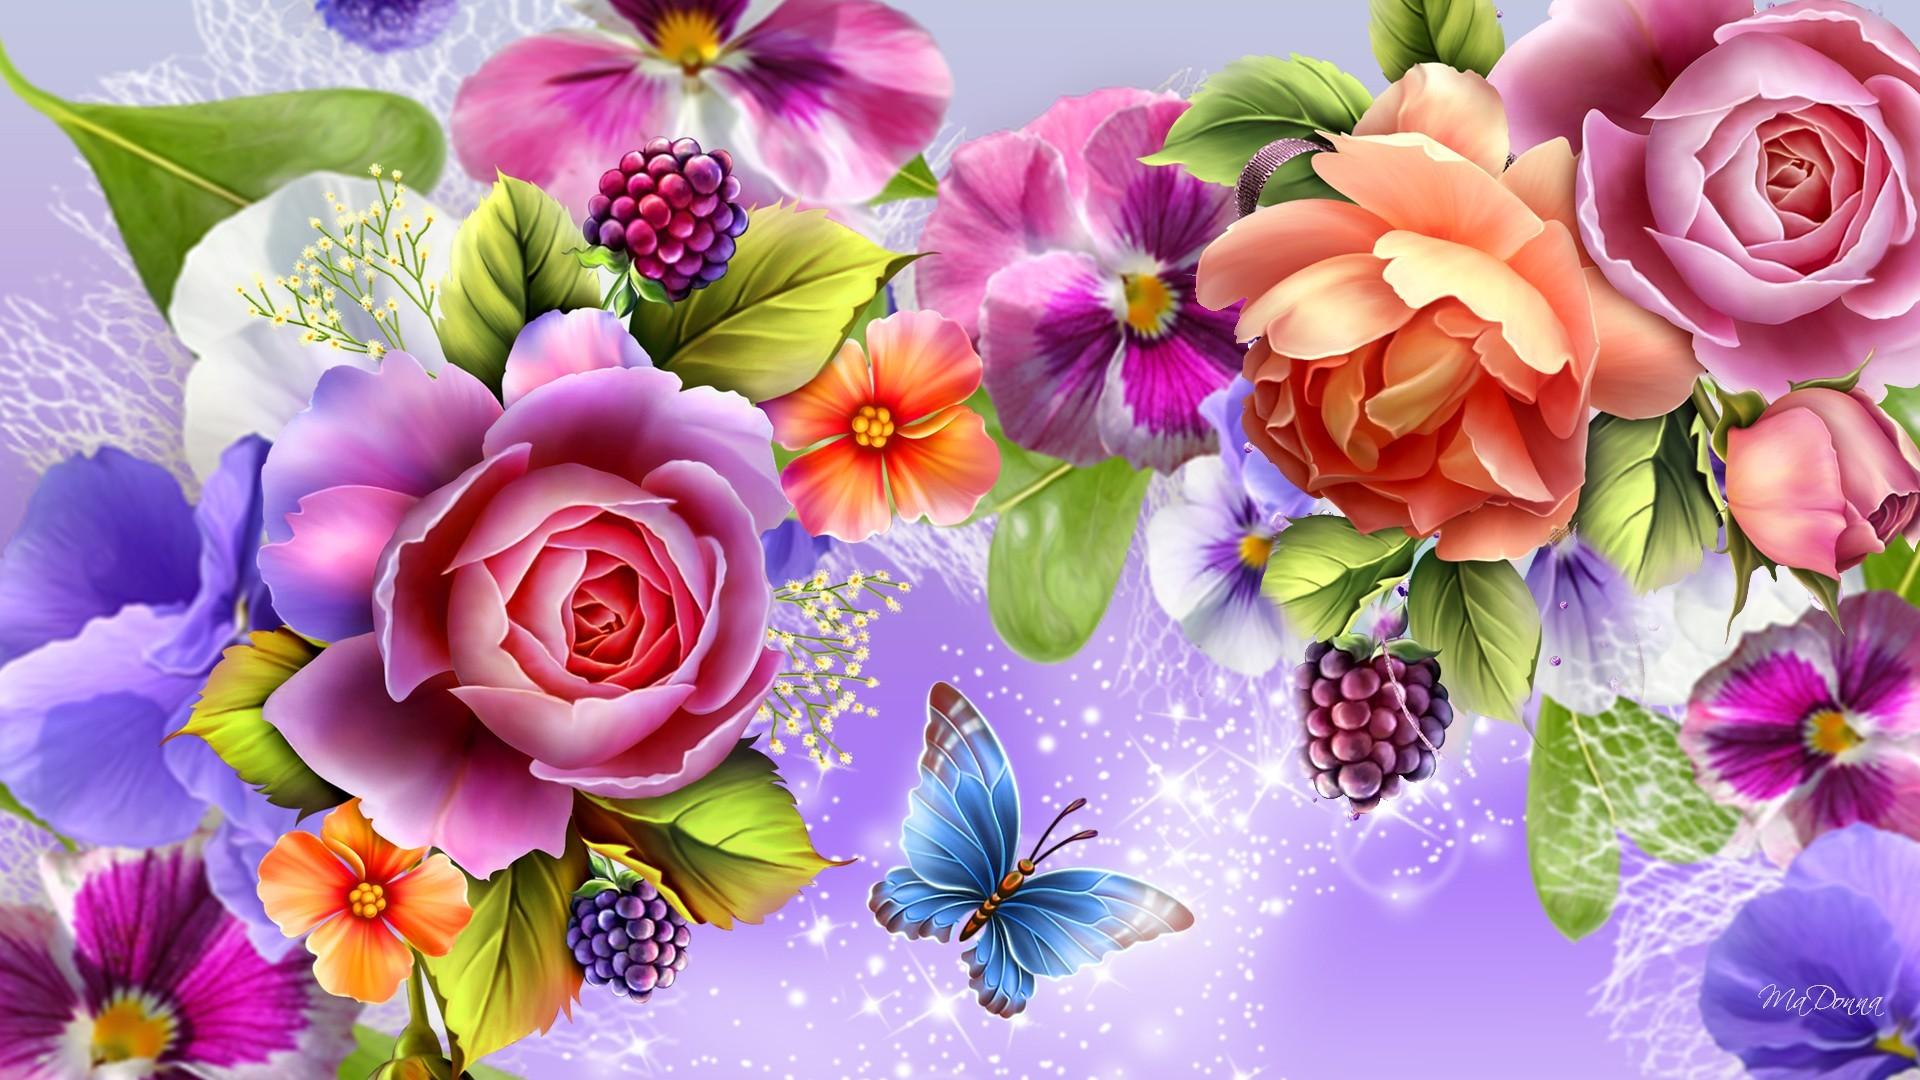 Flowers: Best Berries Flowers Berry Peony Shine Rose Butterfly